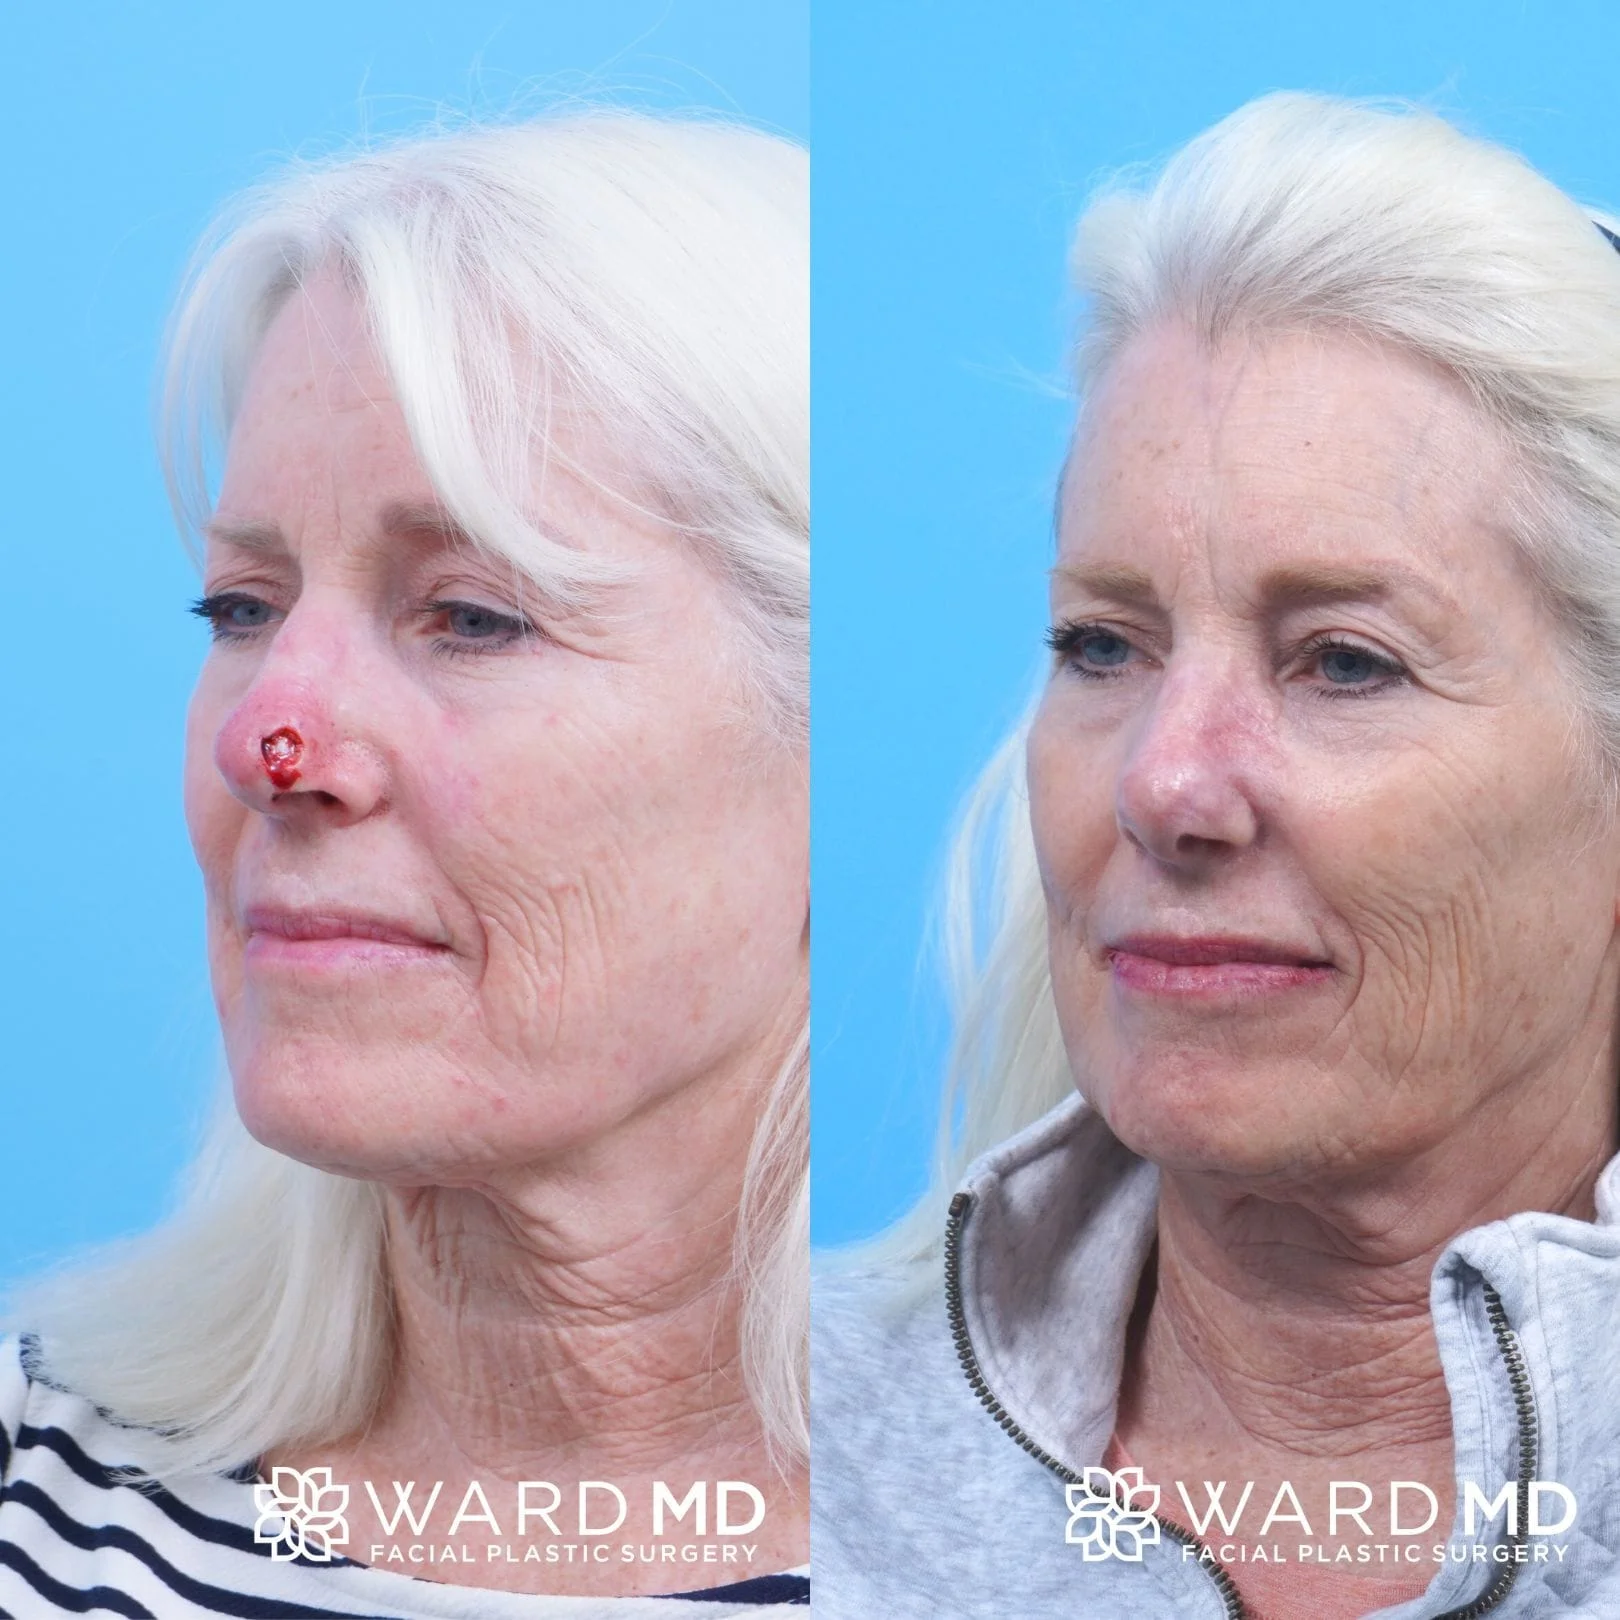 Female Skin Cancer reconstruction patient before and after photo.